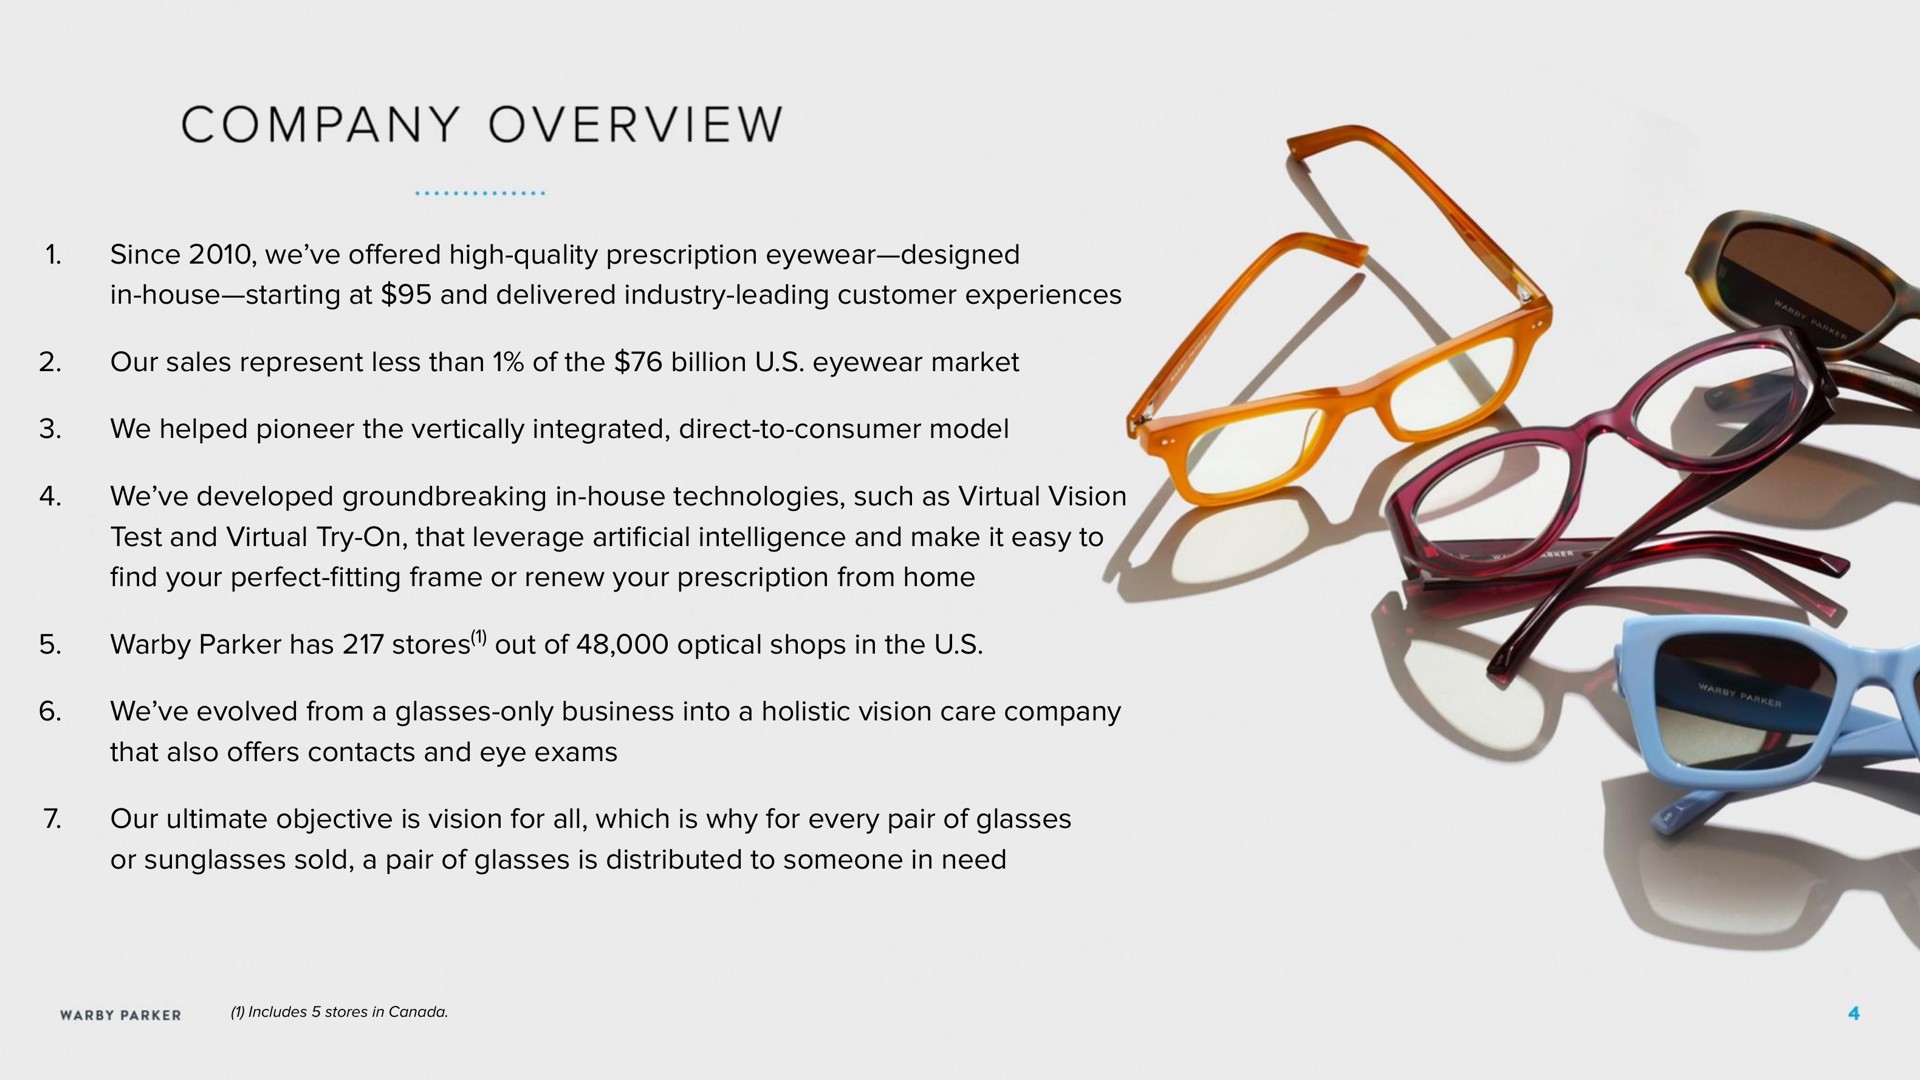 since we high quality prescription eyewear designed in house starting at and delivered industry leading customer experiences our sales represent less than of the billion eyewear market we helped pioneer the vertically integrated direct to consumer model we developed in house technologies such as virtual vision test and virtual try on that leverage intelligence and make it easy to your perfect frame or renew your prescription from home parker has stores out of optical shops in the we evolved from a glasses only business into a holistic vision care company that also ers contacts and eye exams our ultimate objective is vision for all which is why for every pair of glasses or sunglasses sold a pair of glasses is distributed to someone in need overview offered artificial find perfect fitting offers | Warby Parker